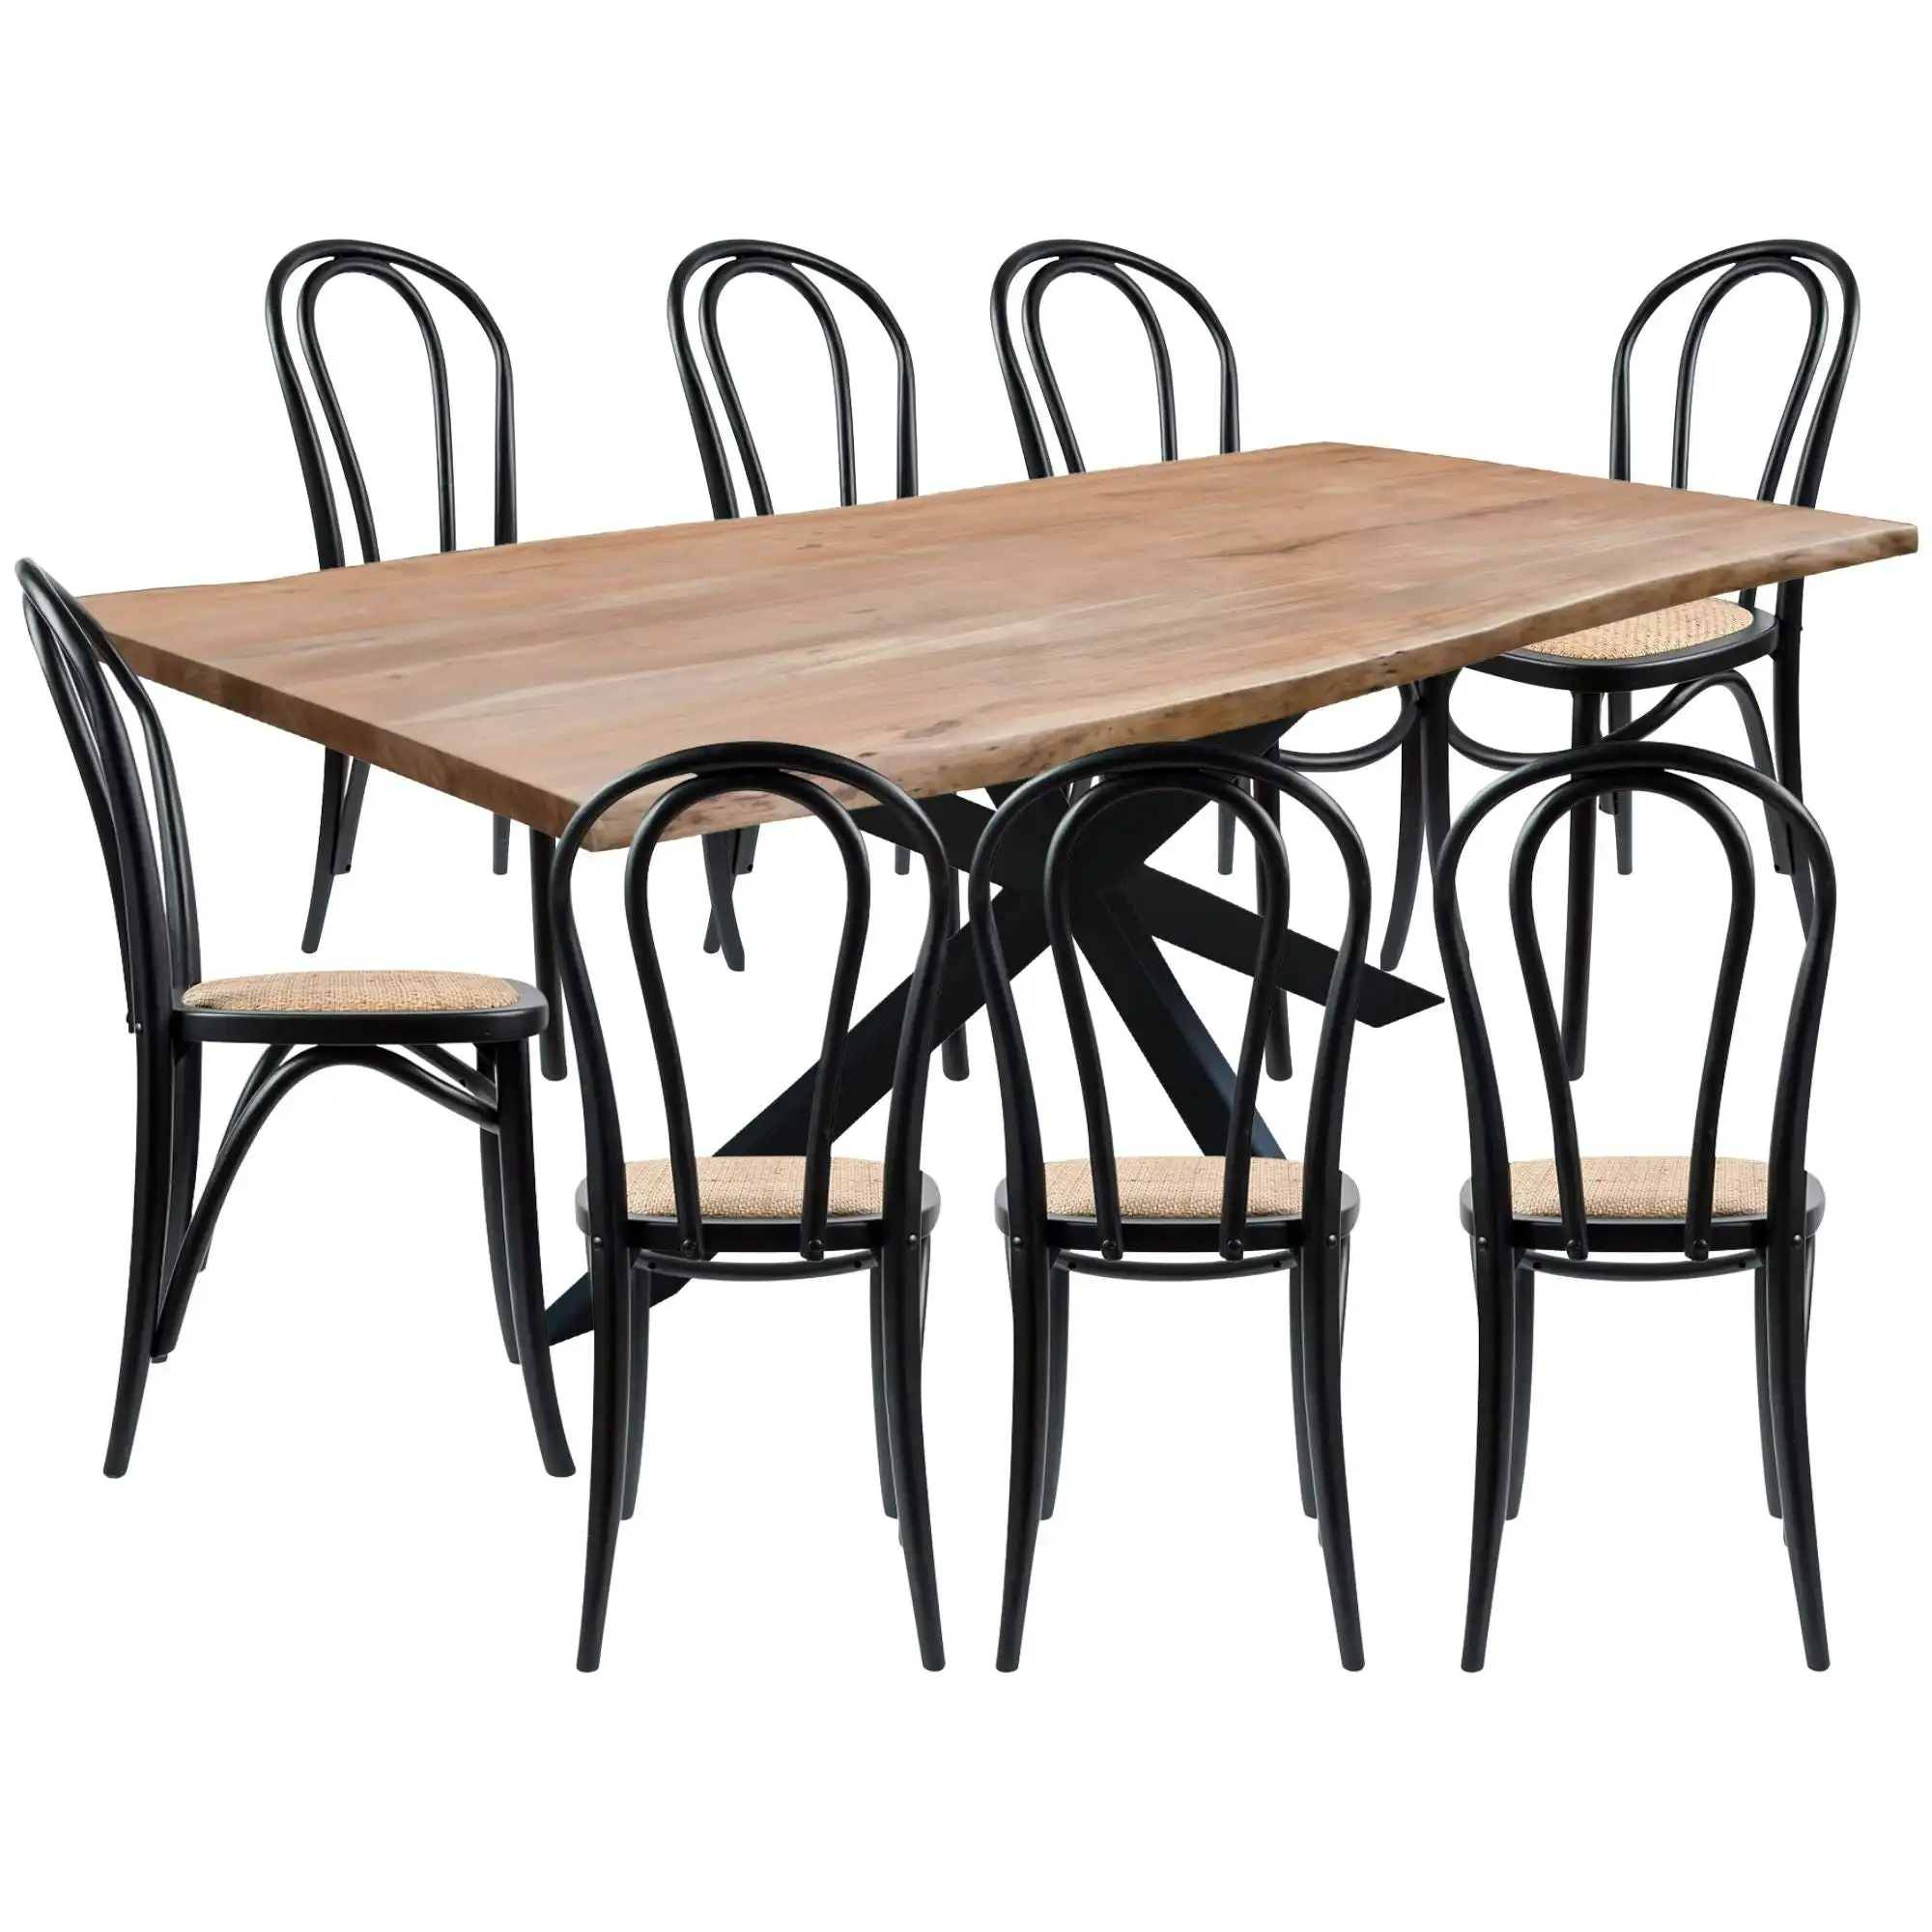 Lantana 9pc 240cm Dining Table Arched Chair Set